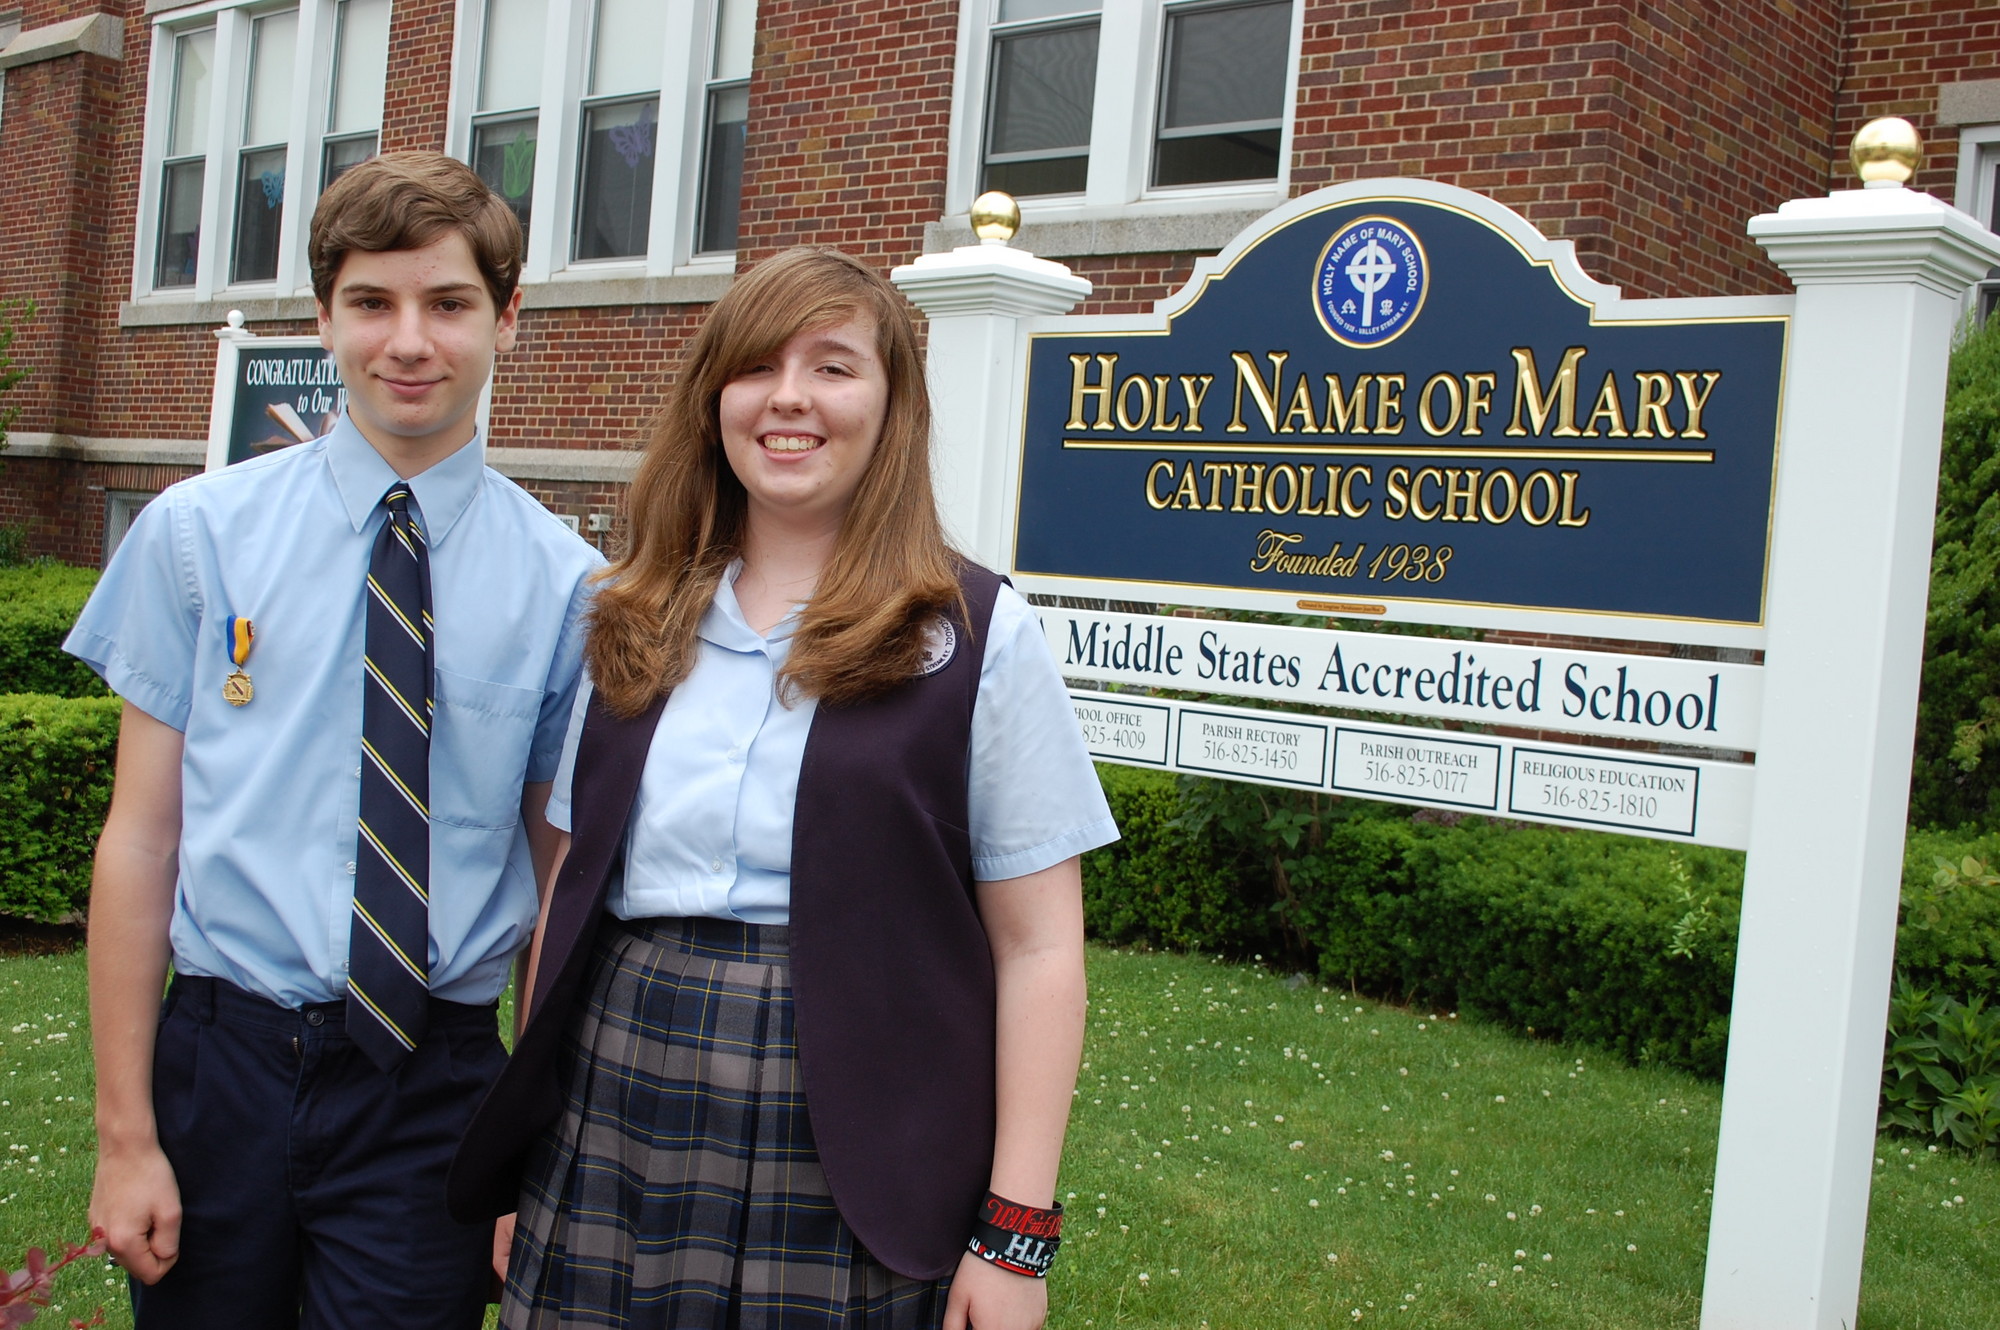 Daniel Bosko and Monica Ferrall are Holy Name of Mary School’s top graduates for the class of 2013.